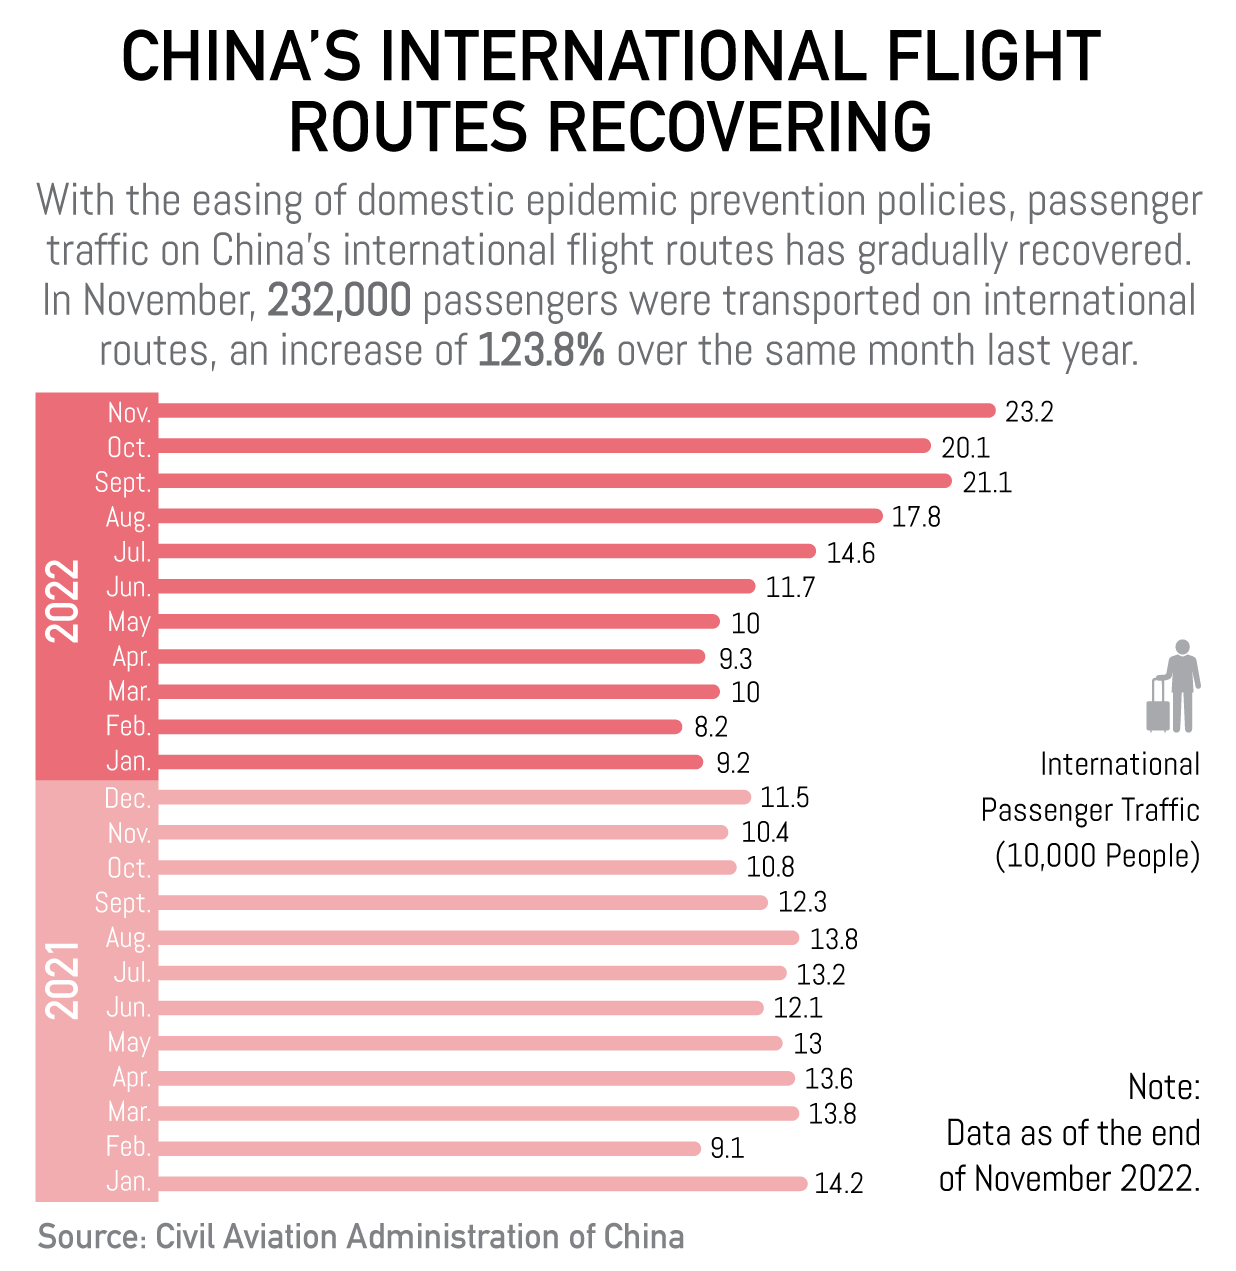 China's COVID-19 fight in numbers: China's international flight routes recovering